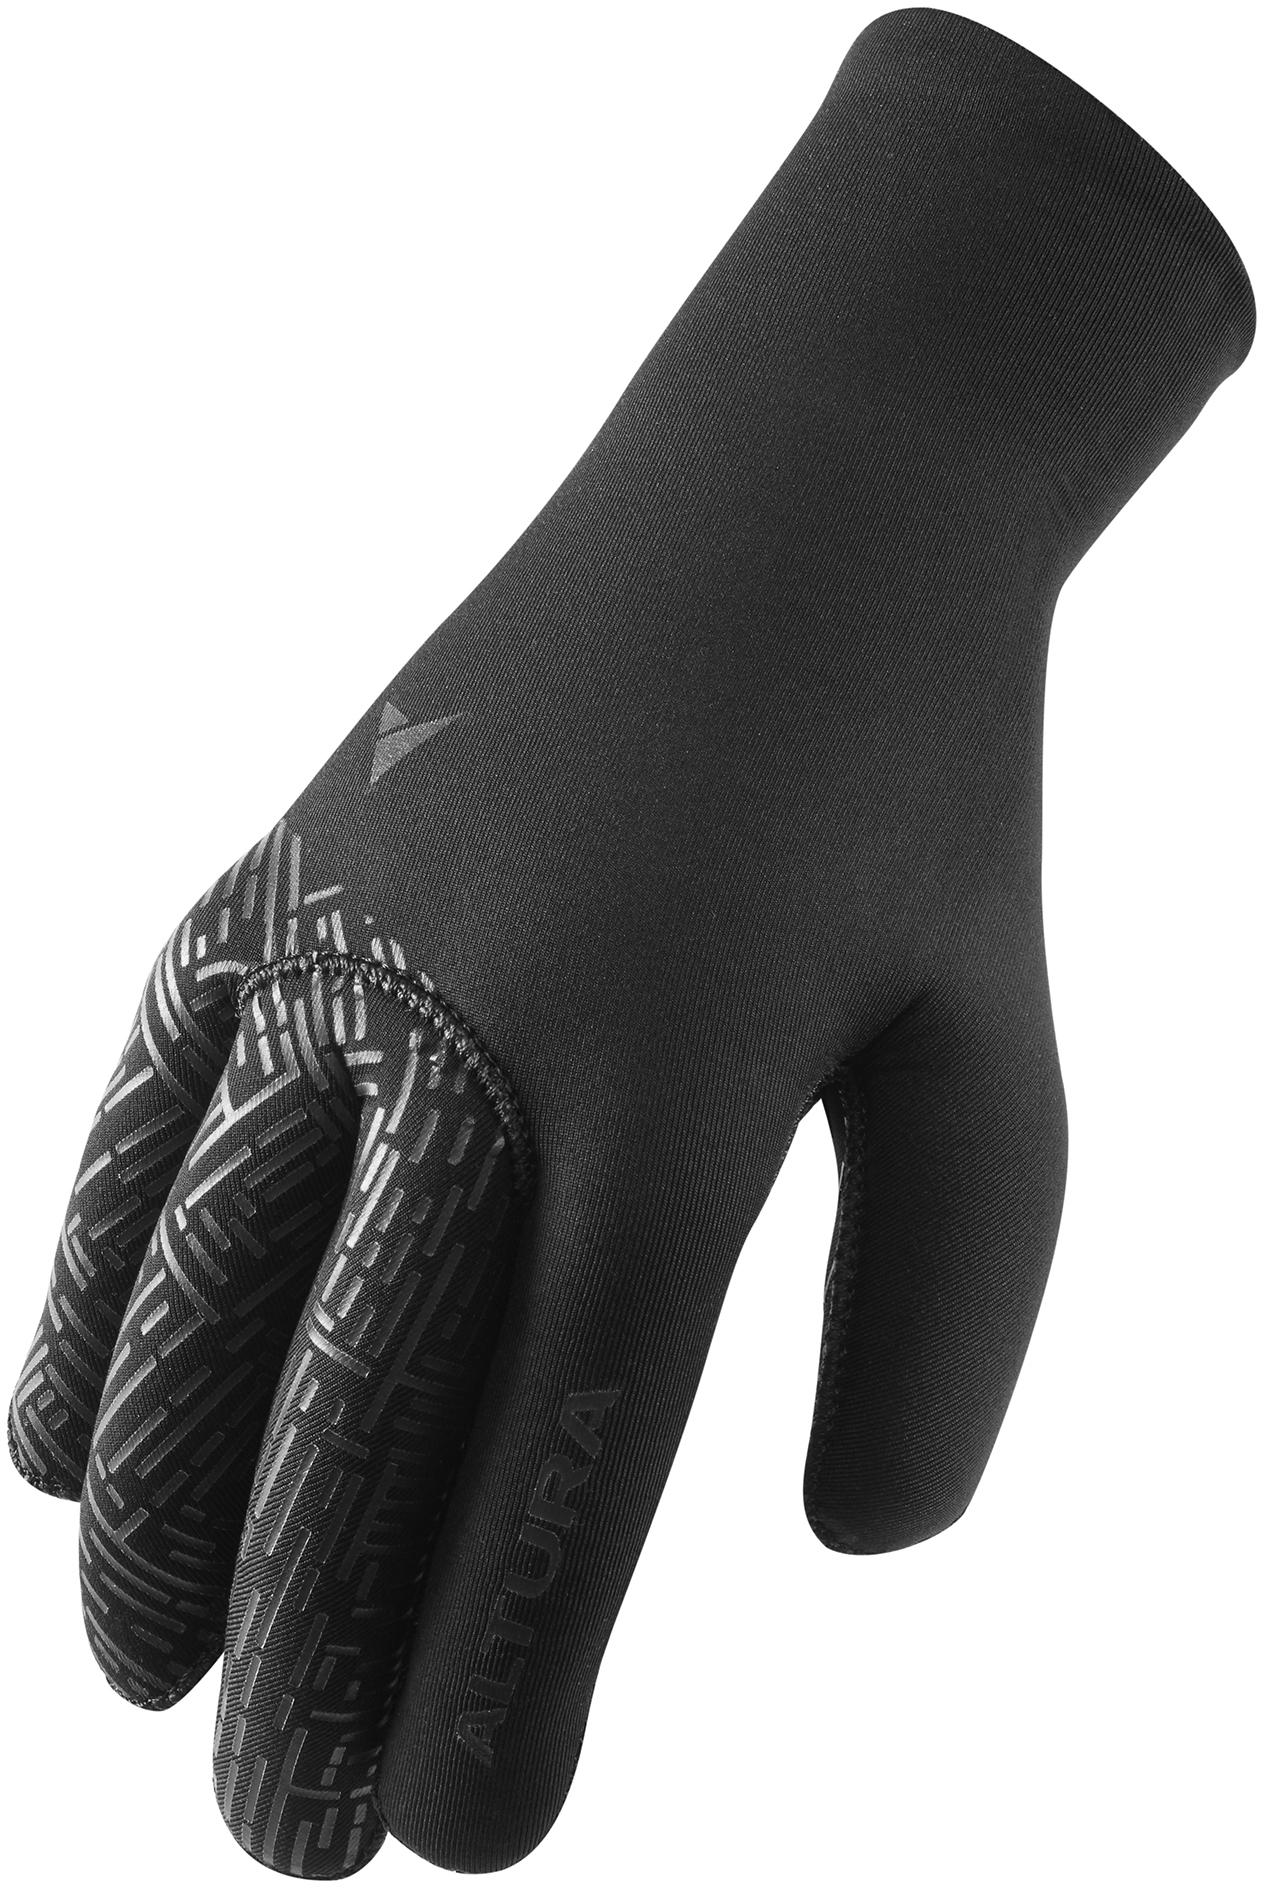 Altura Thermostretch Windproof Gloves Black S